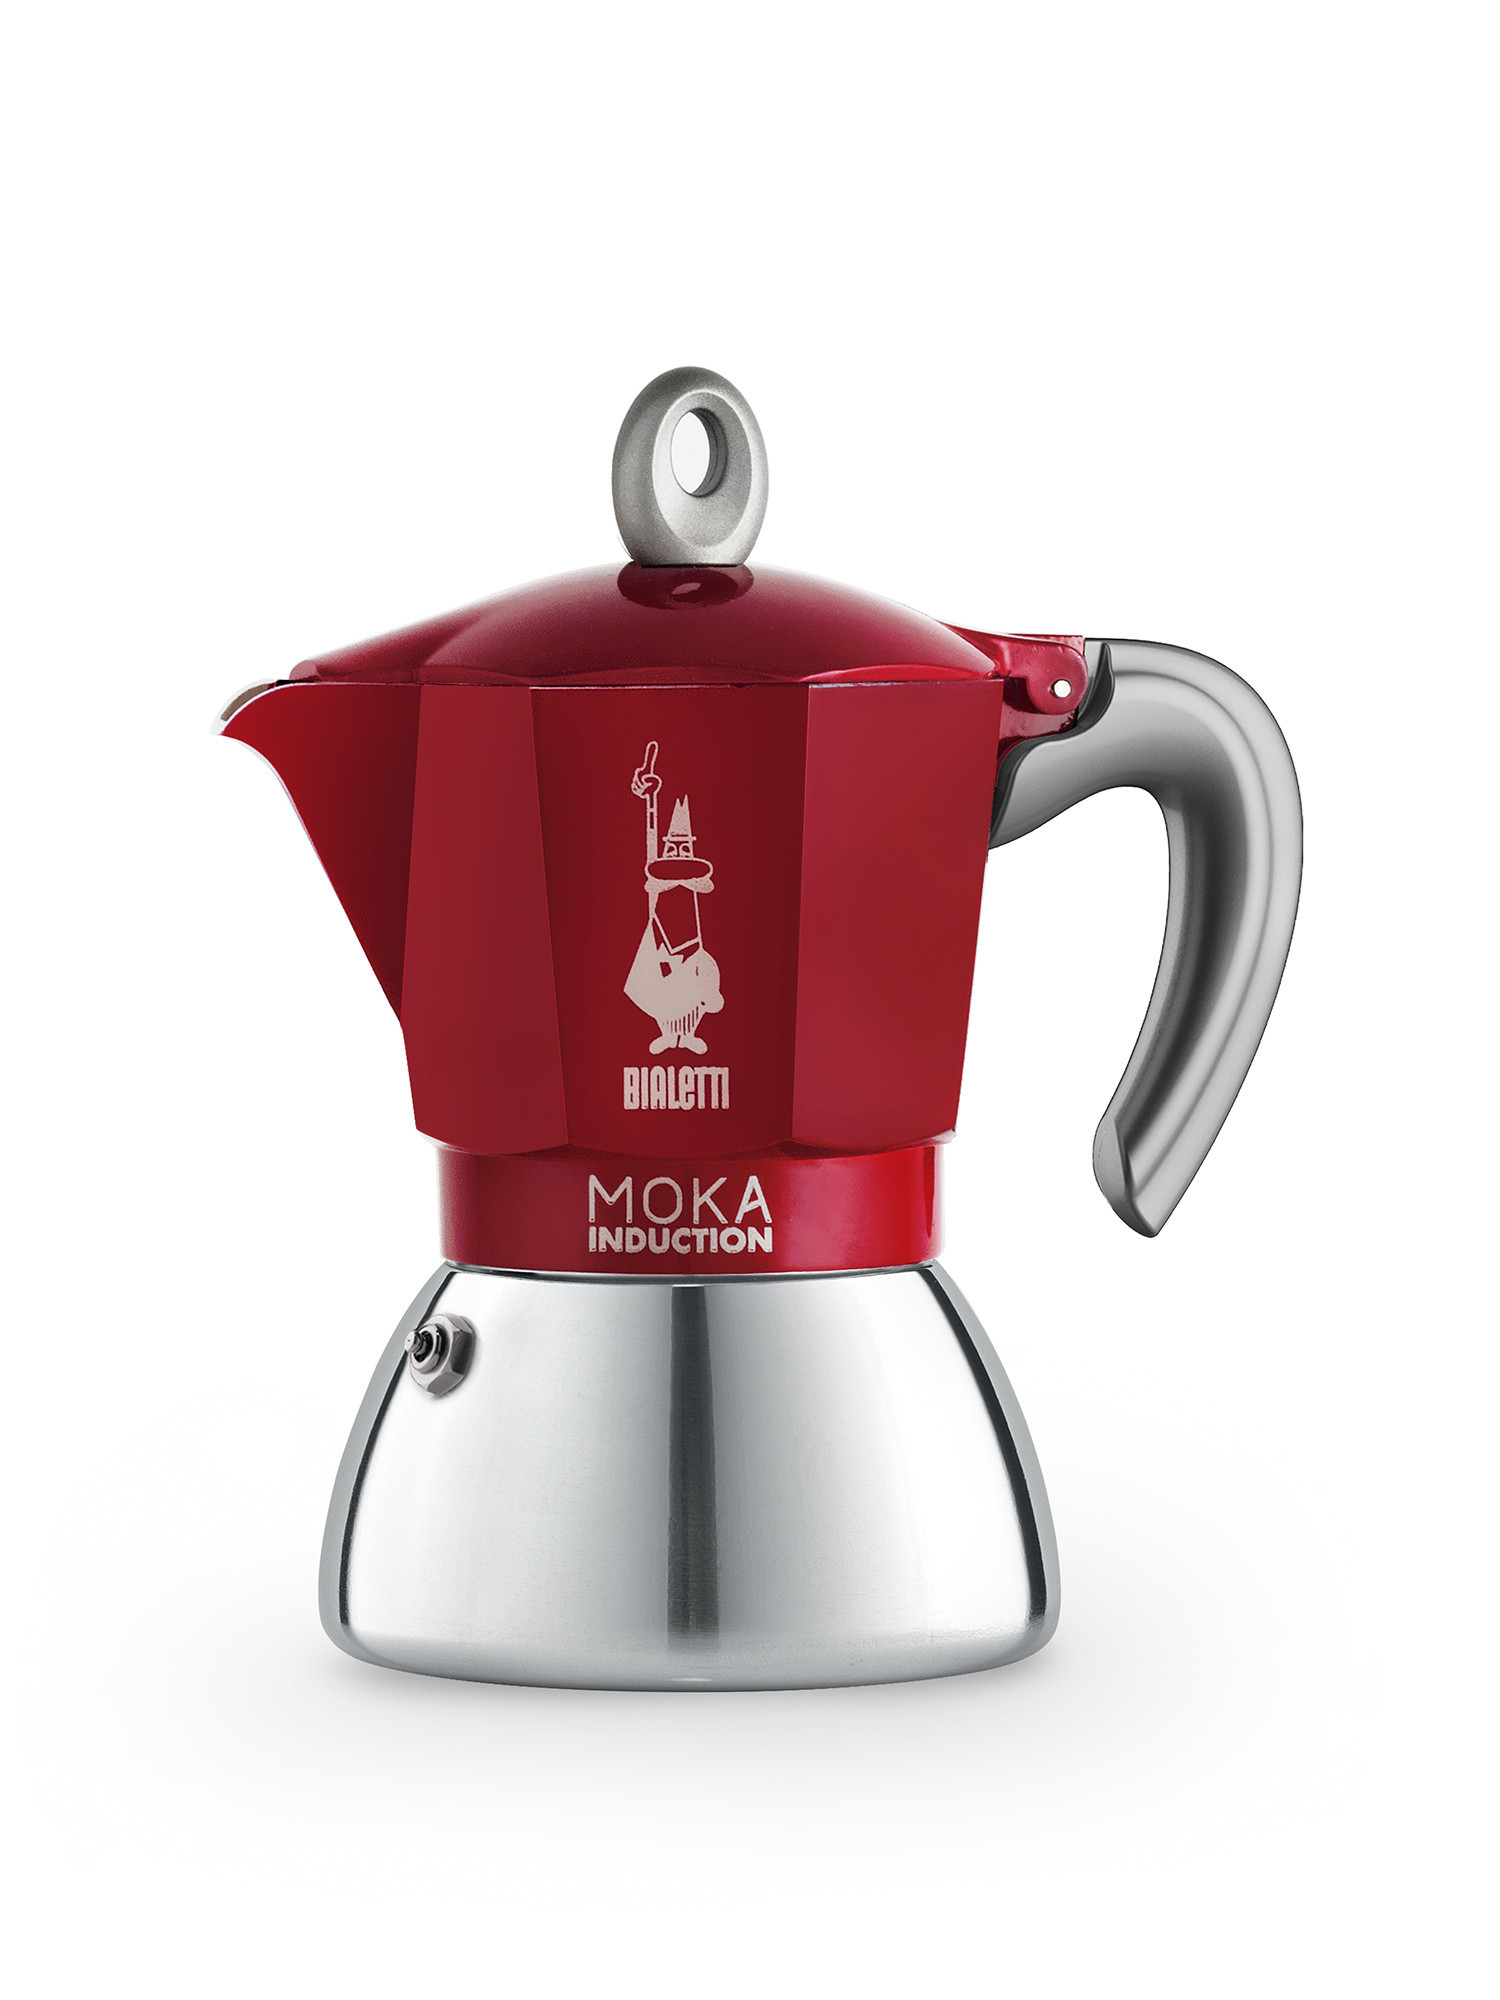 Bialetti - Moka Induction 6 cups, Red, large image number 0